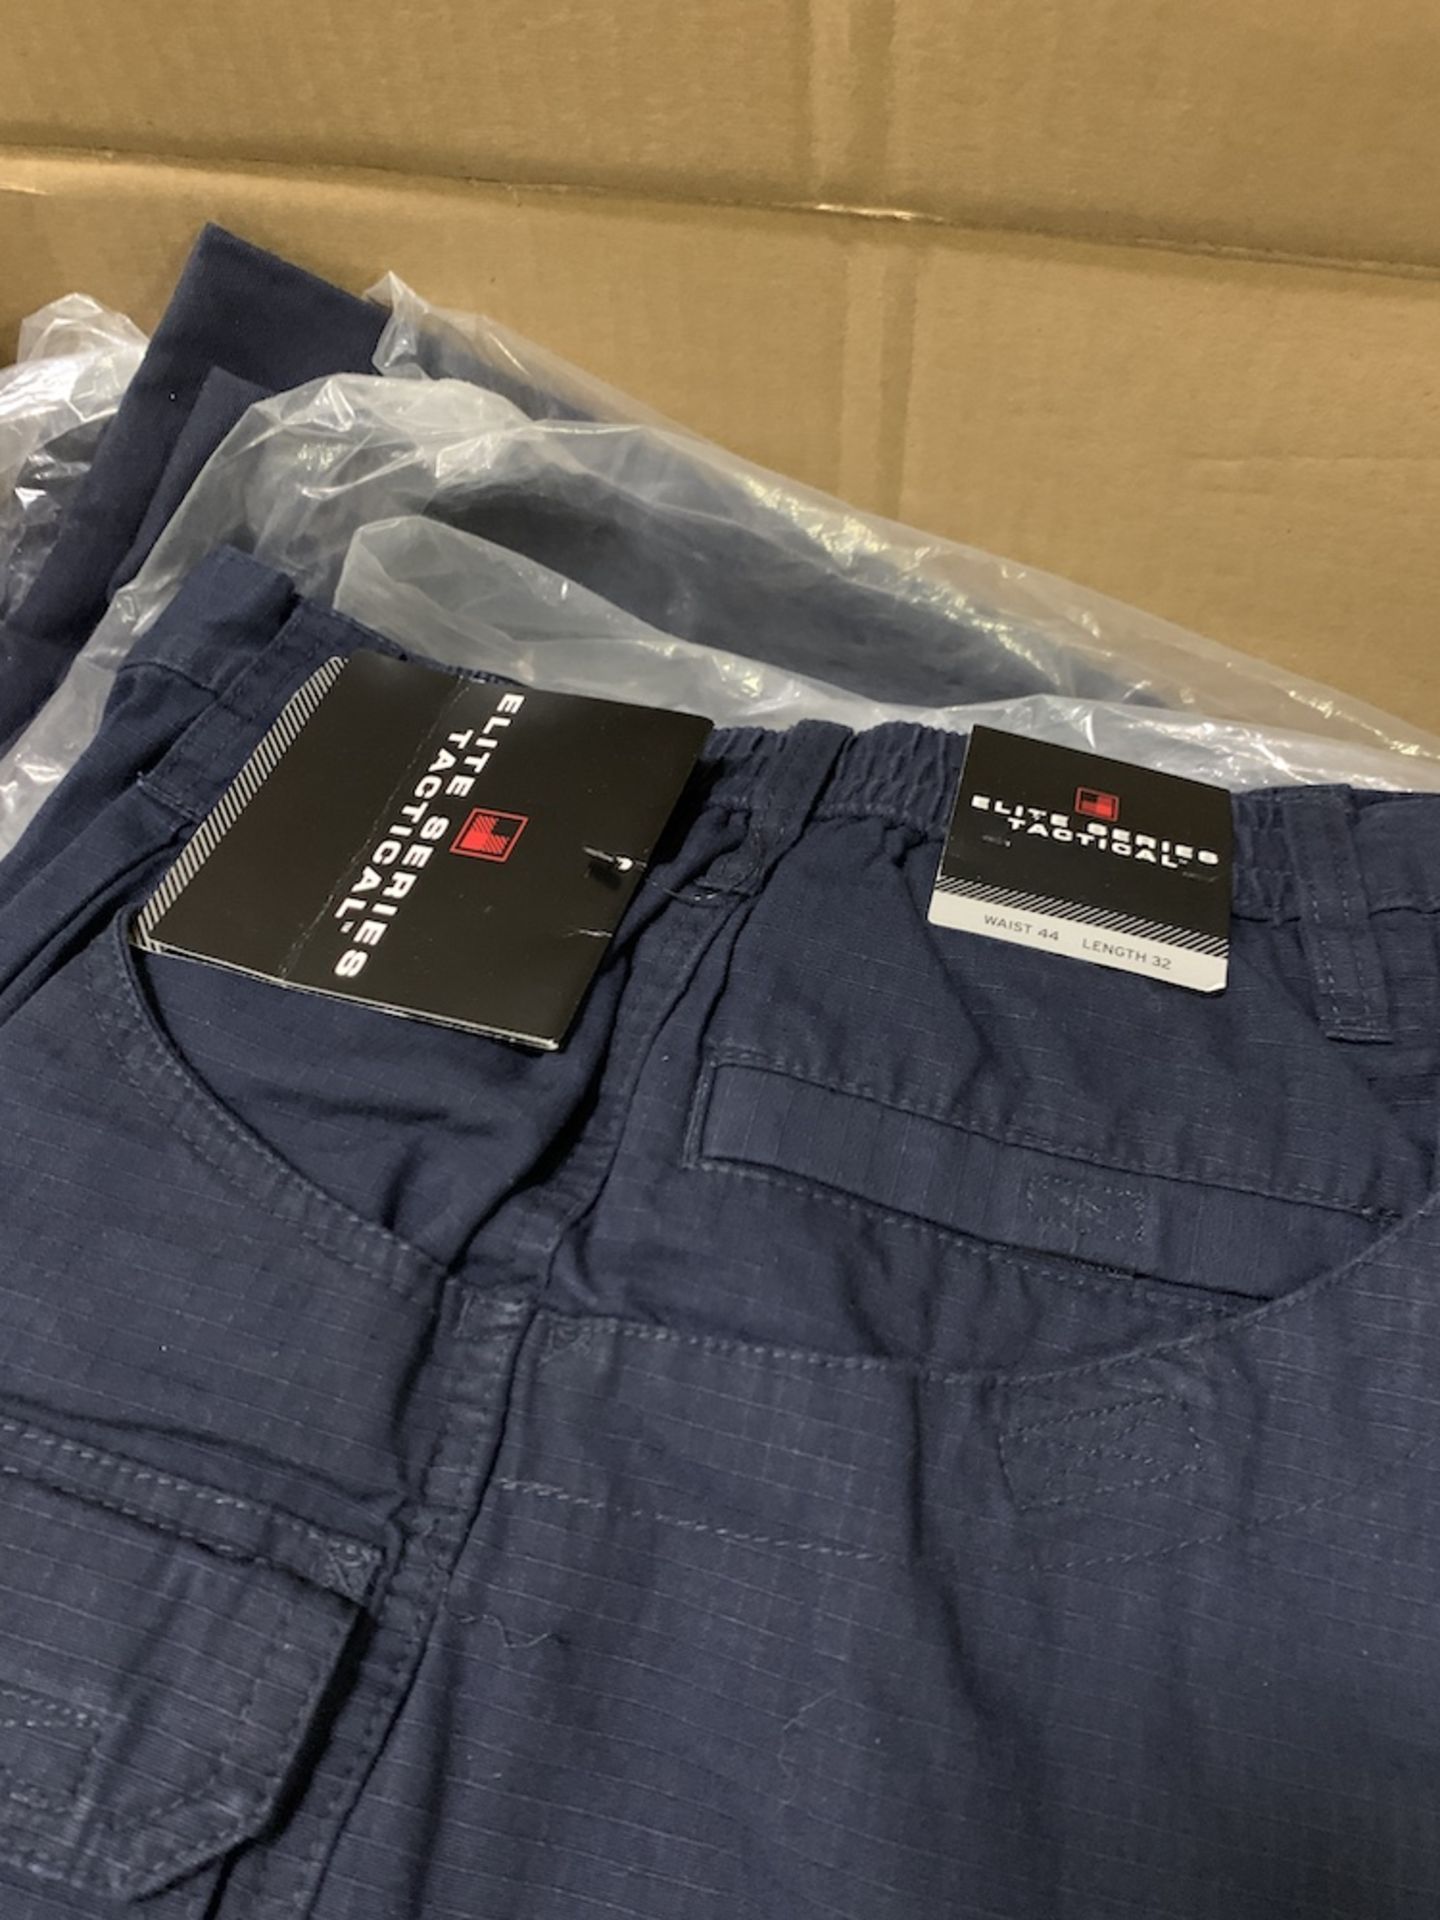 51 Pairs of Woolrich Elite Series Tactical Pants, Teflon, Navy, New, Various Sizes, Retail $1,275+ - Image 2 of 5